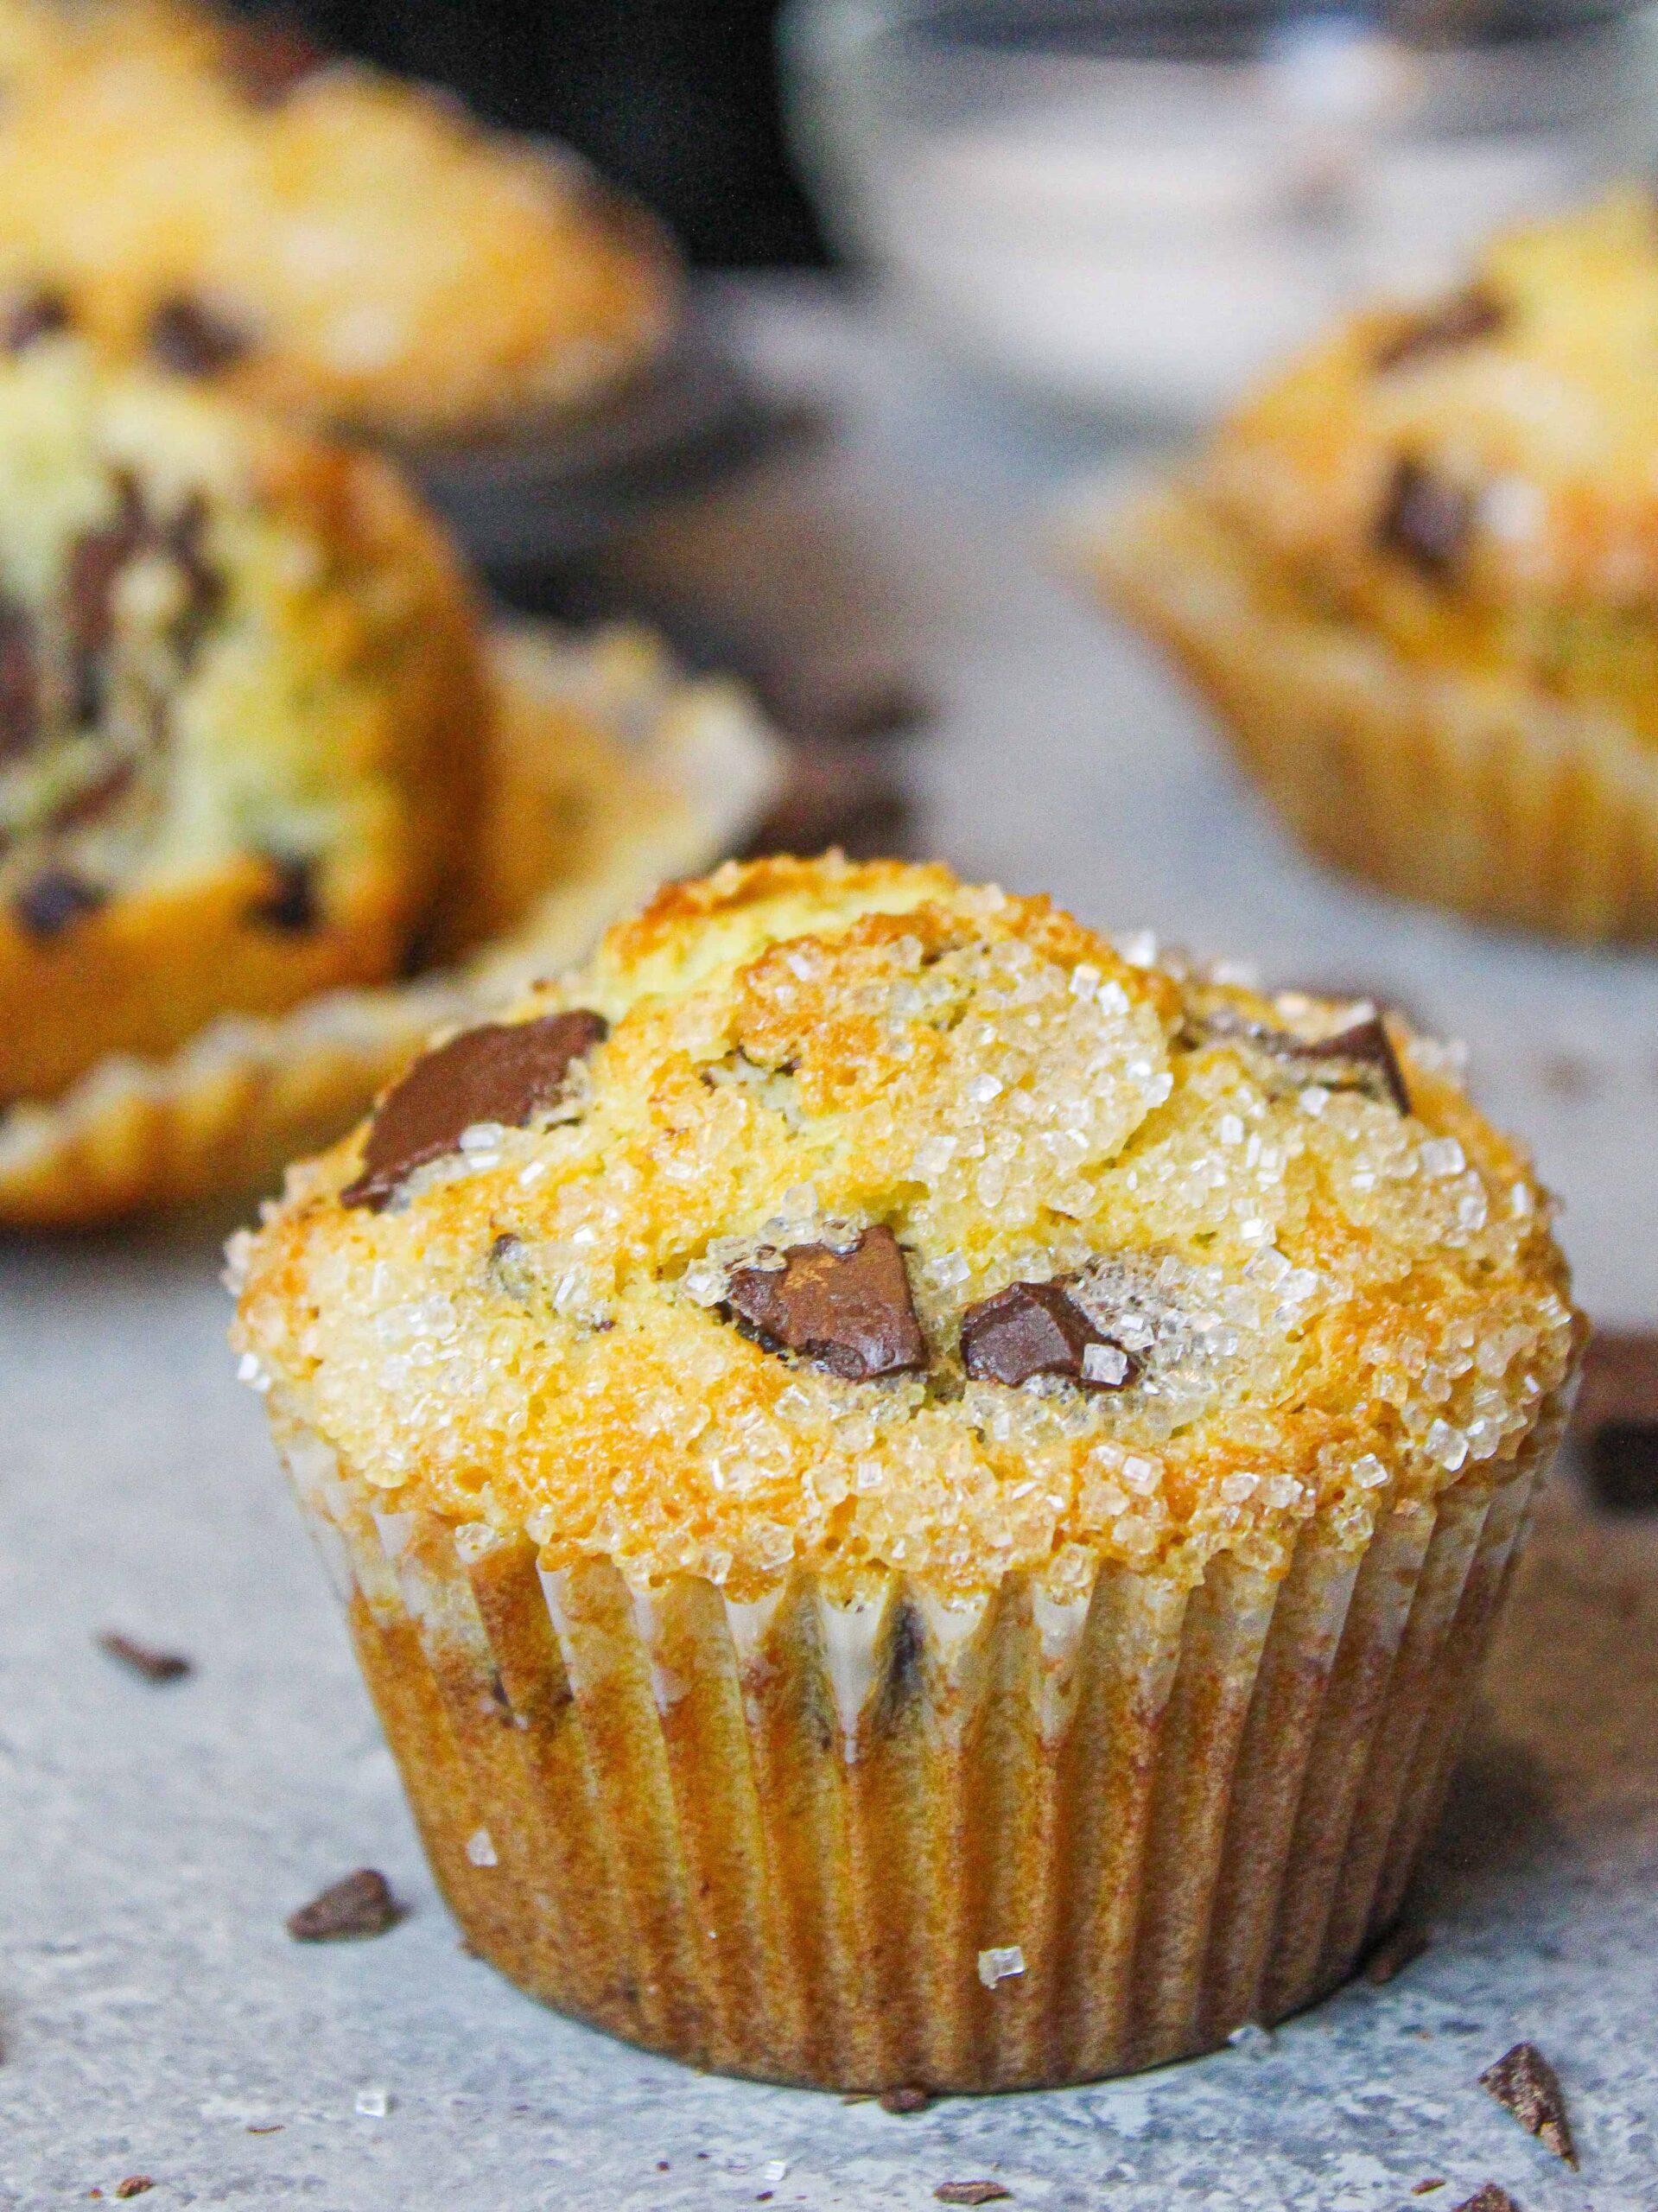 photo of baked bakery style chocolate chip muffin